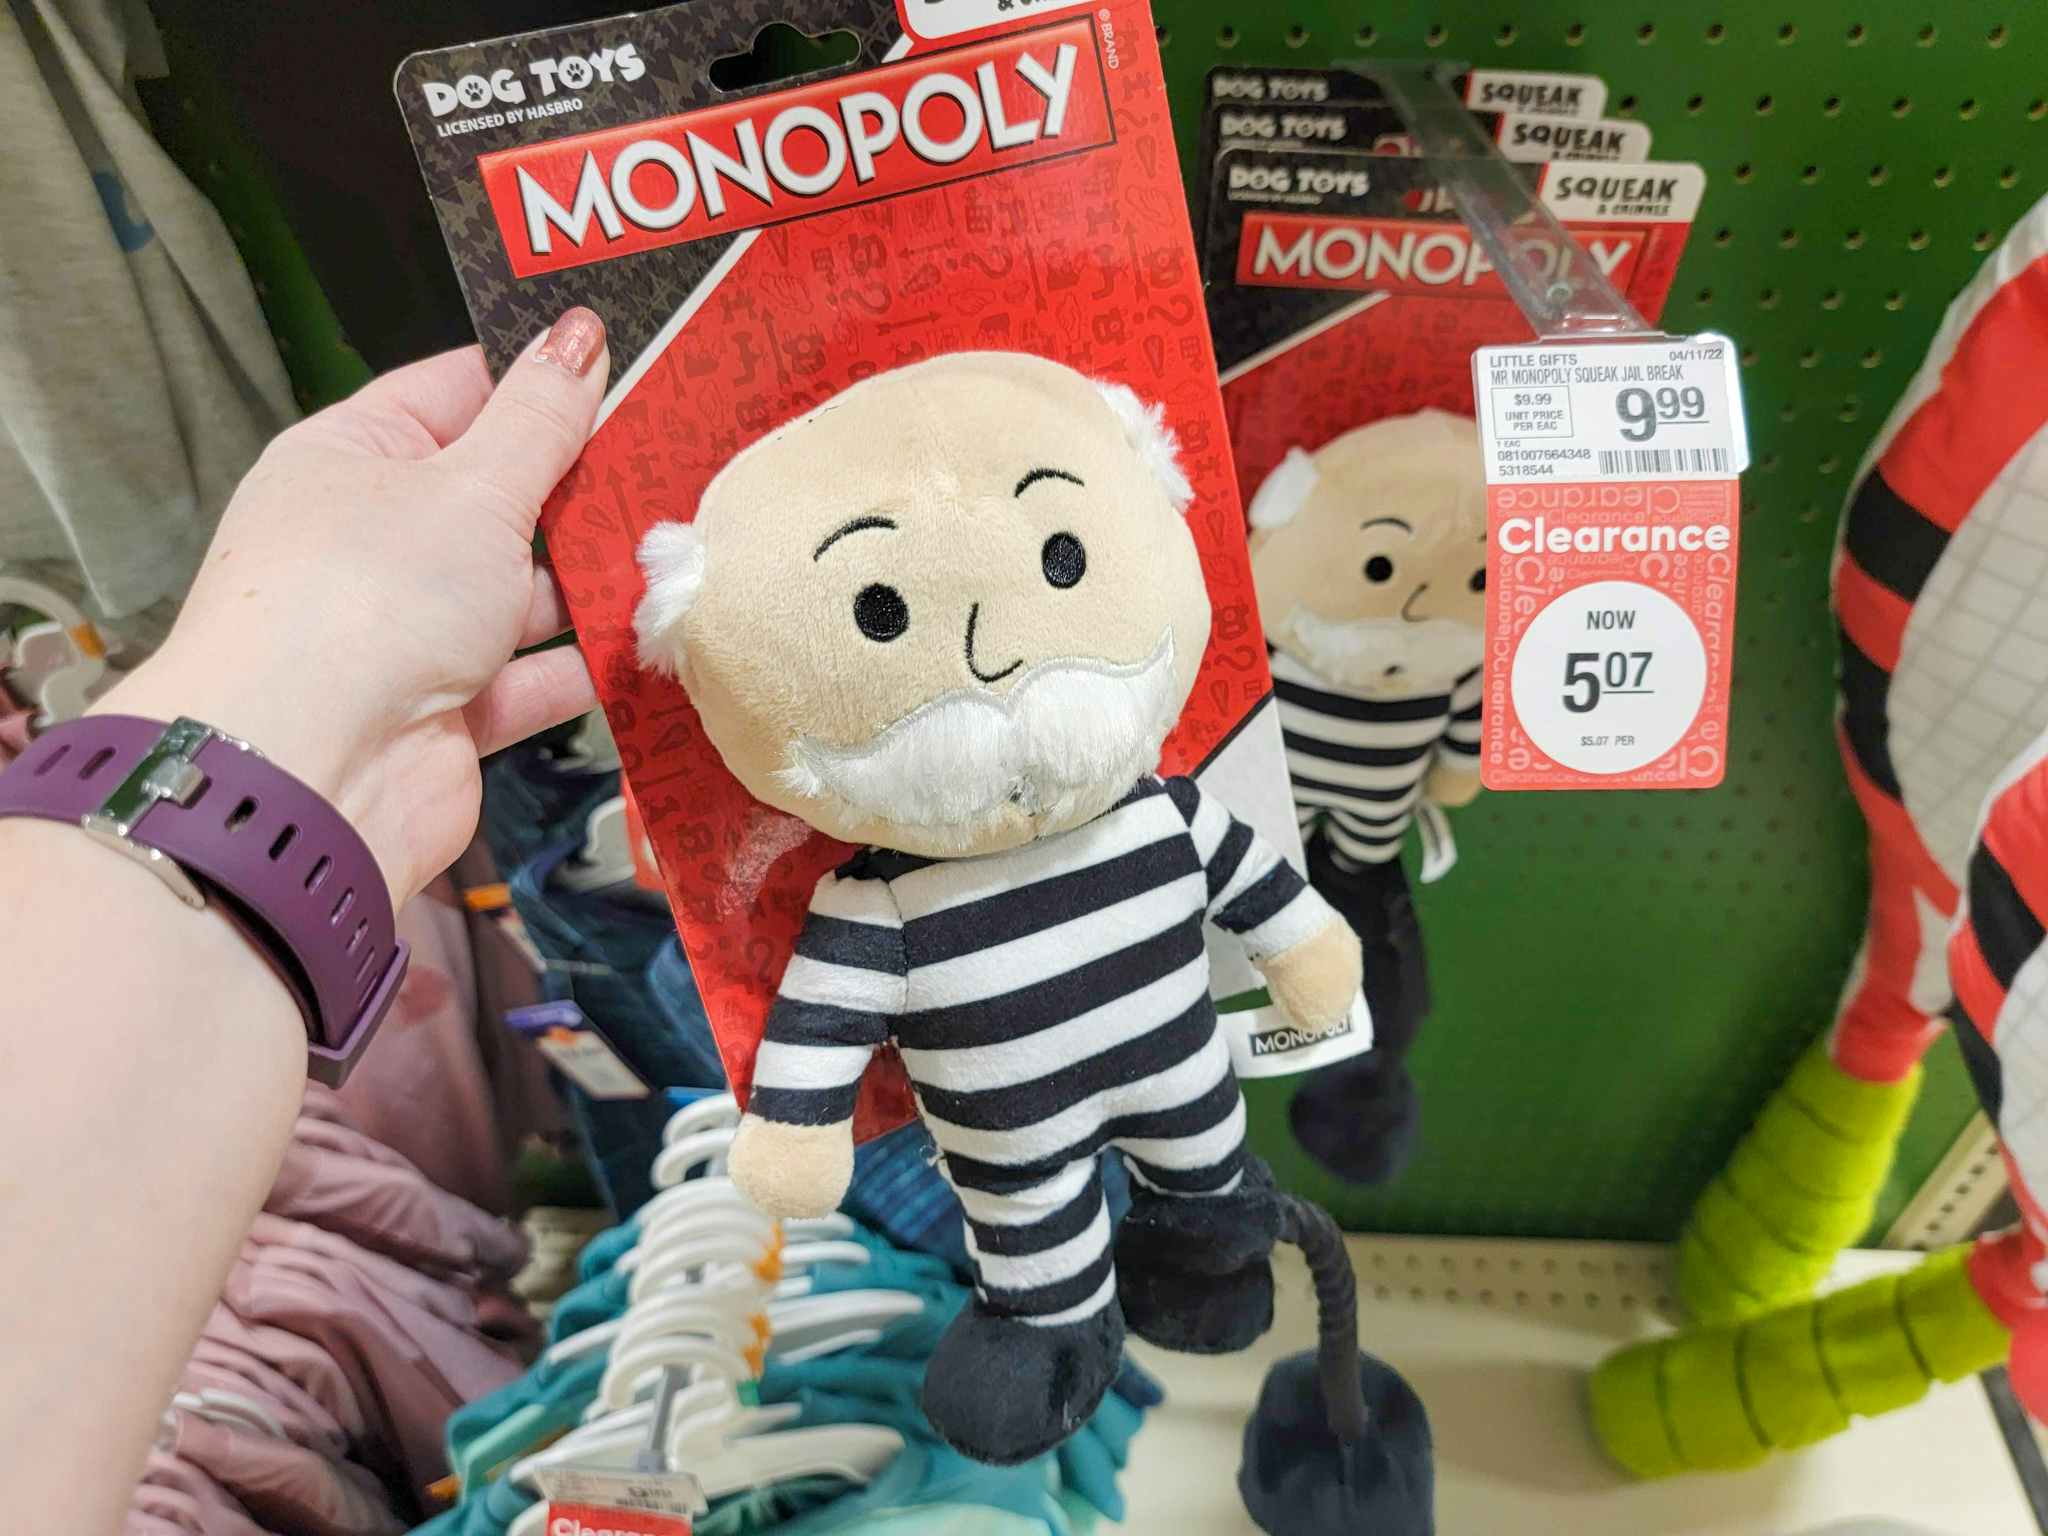 hand holding a monopoly man dog toy